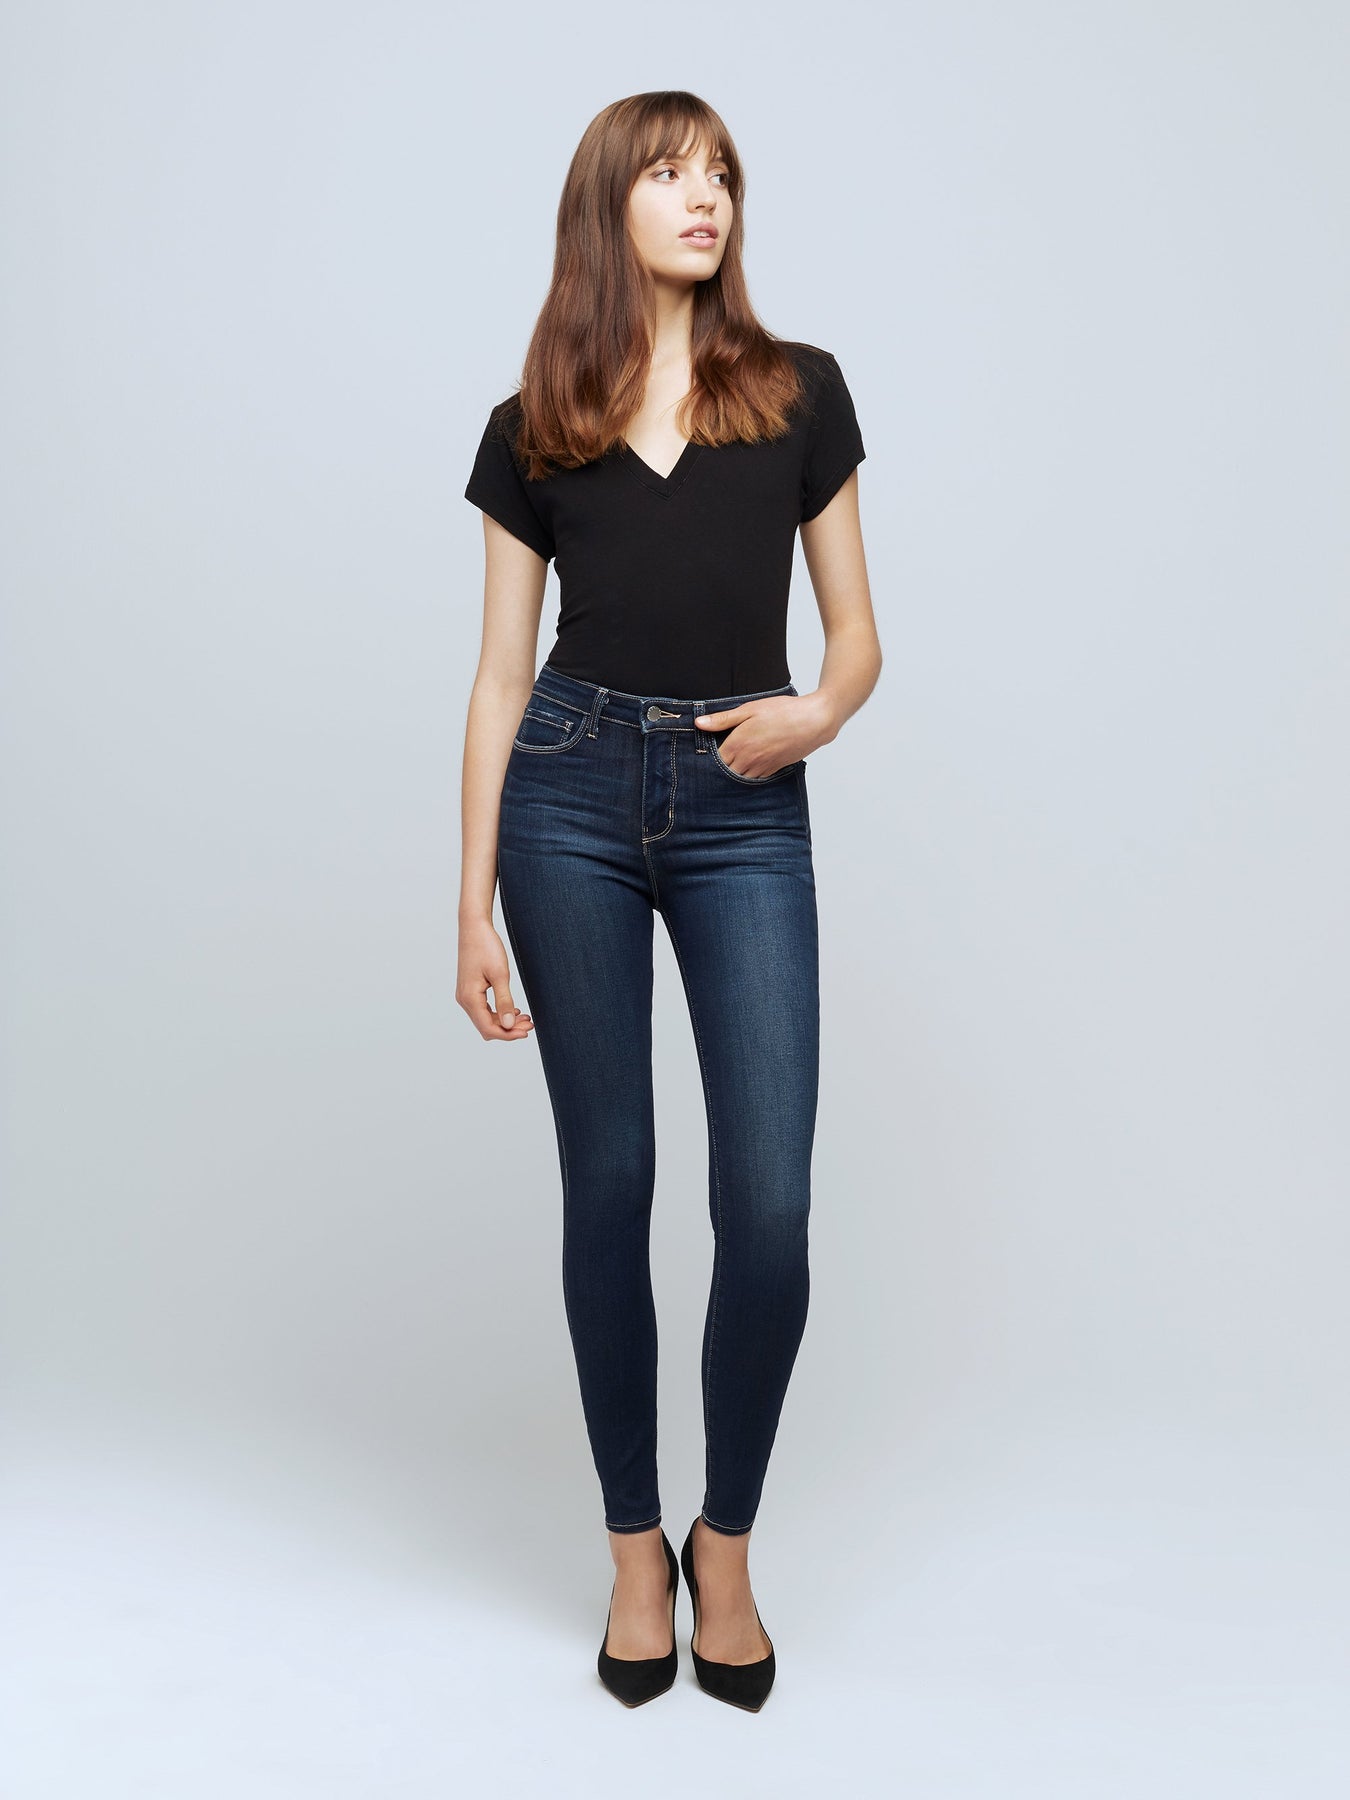 Jeans for Women | Over the Rainbow Canada